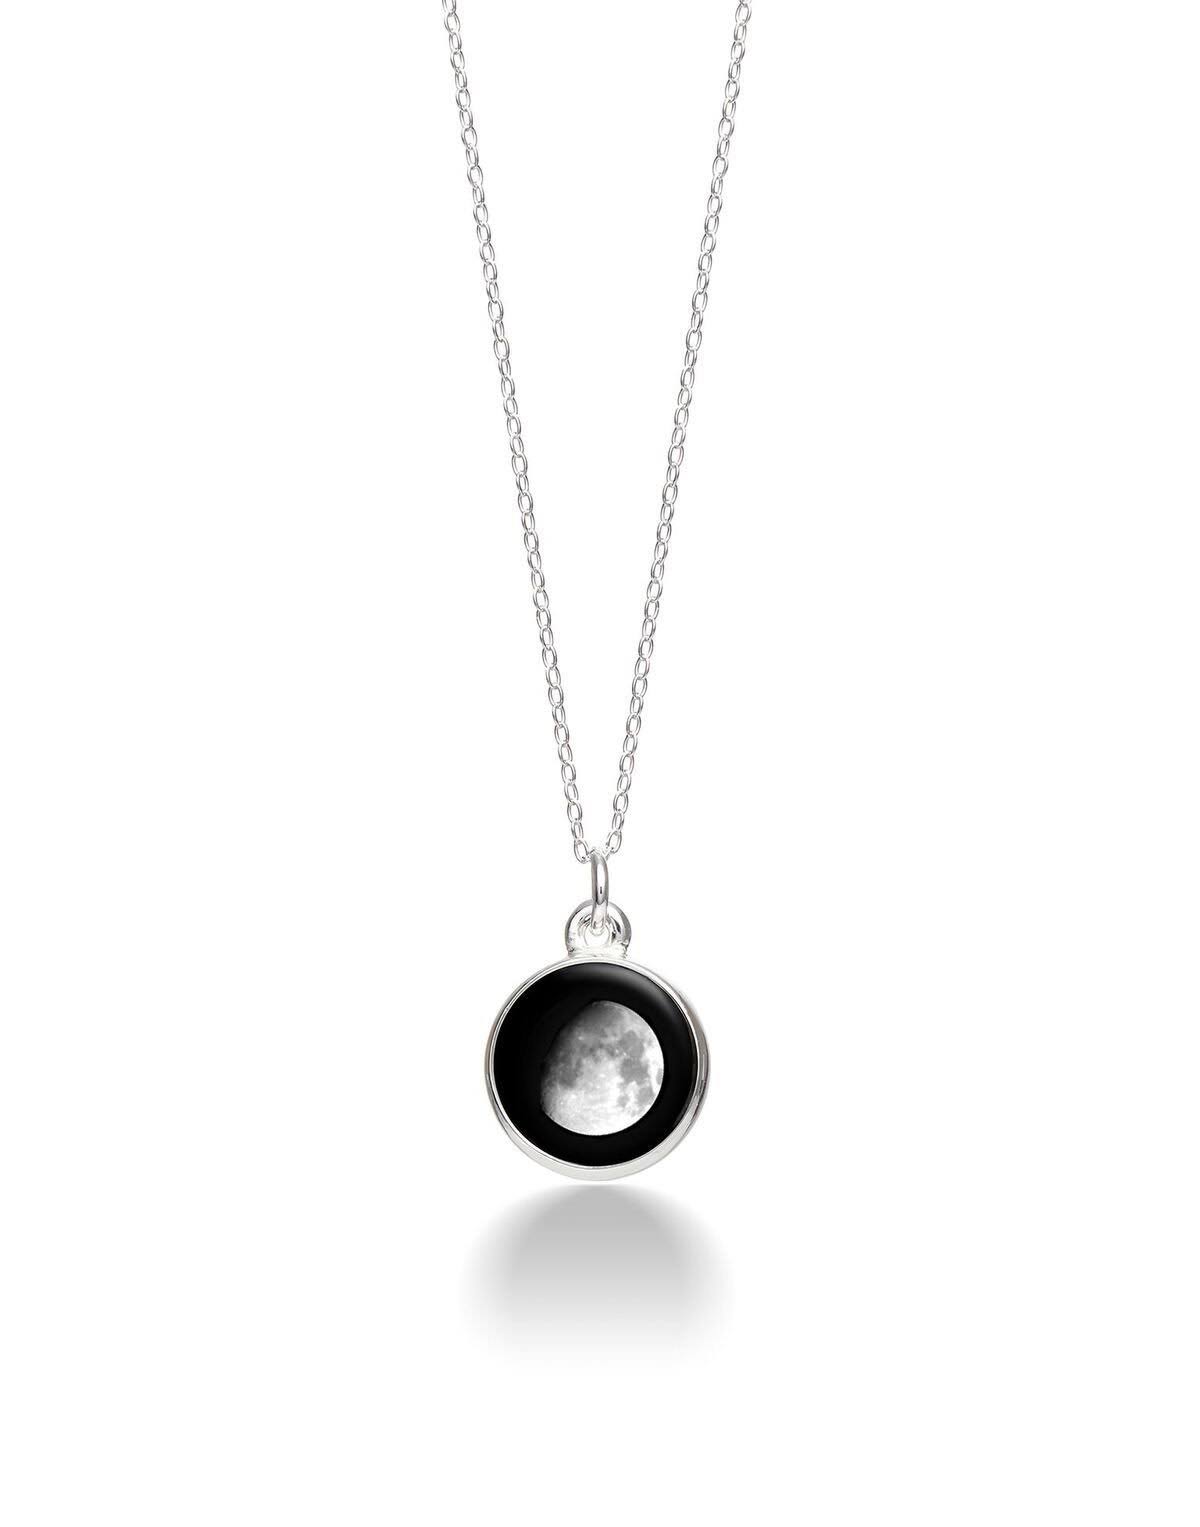 Moonglow - Charmed Simplicity Necklace (7A) One Size